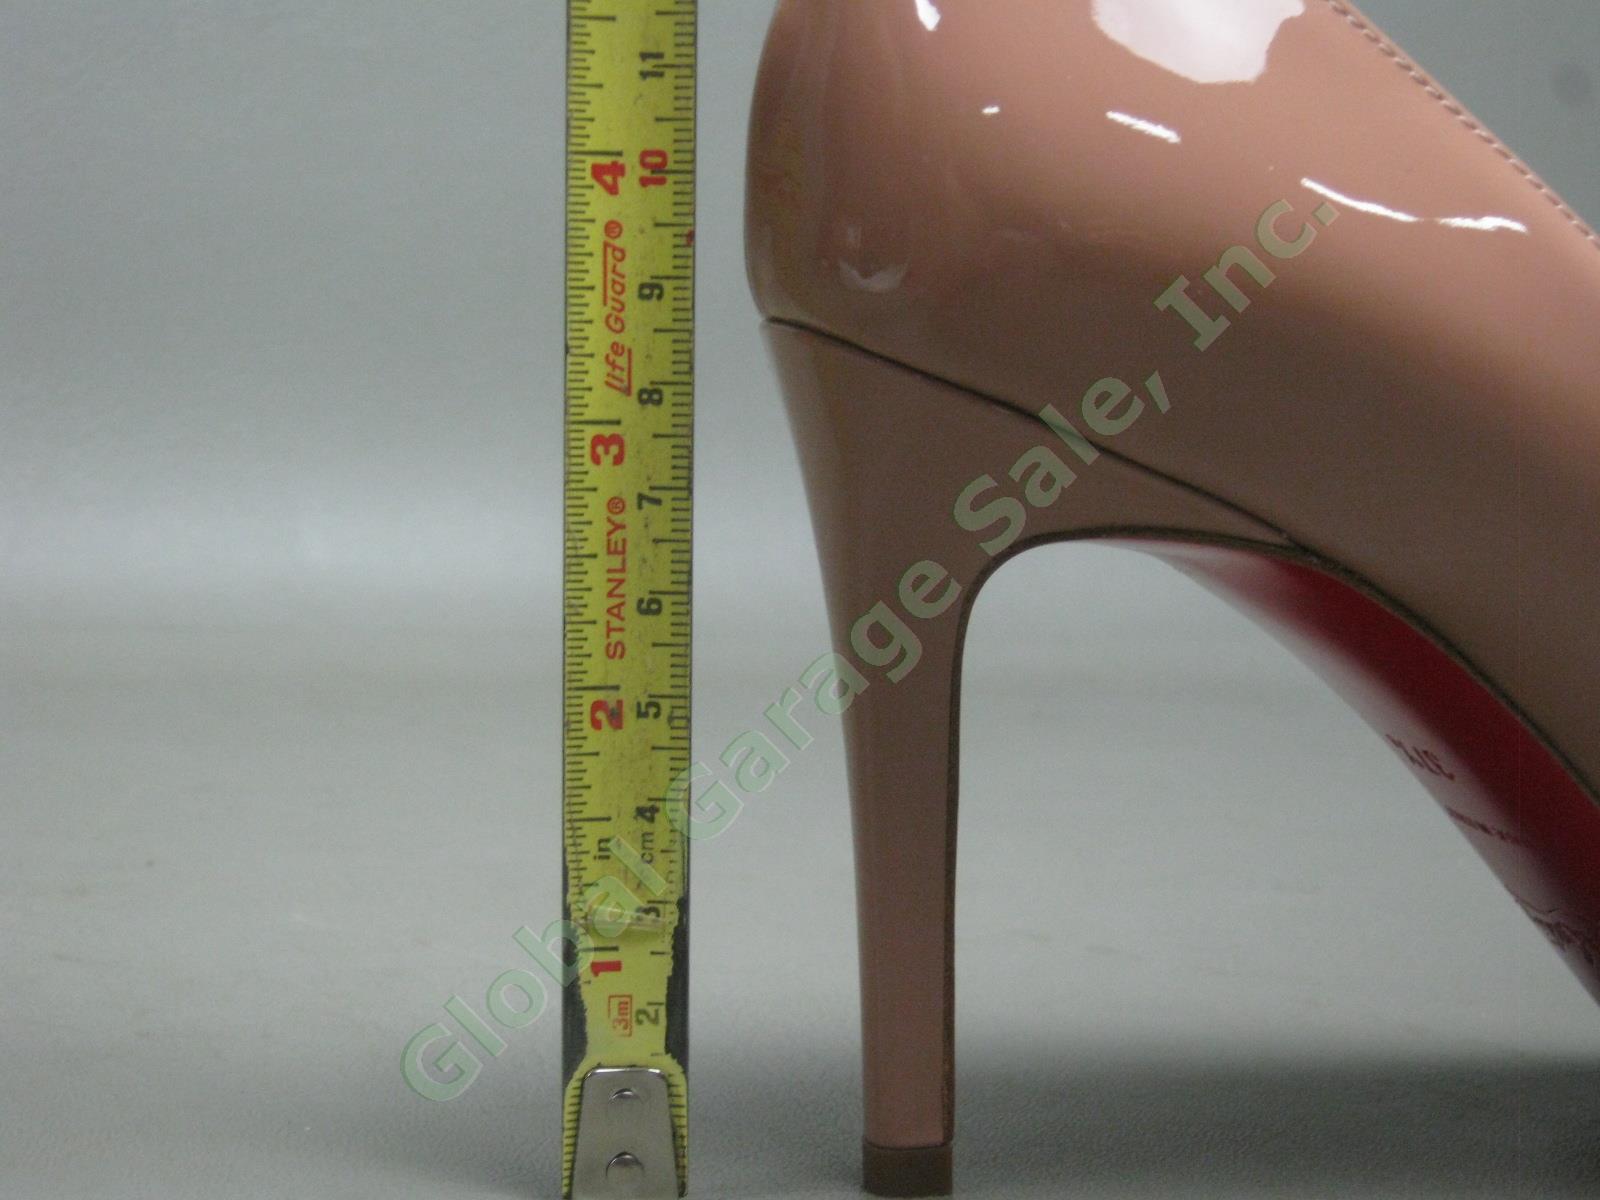 NEW Christian Louboutin Nude Simple Patent Calf Leather Pump 90mm Heel 37.5/7.5 9